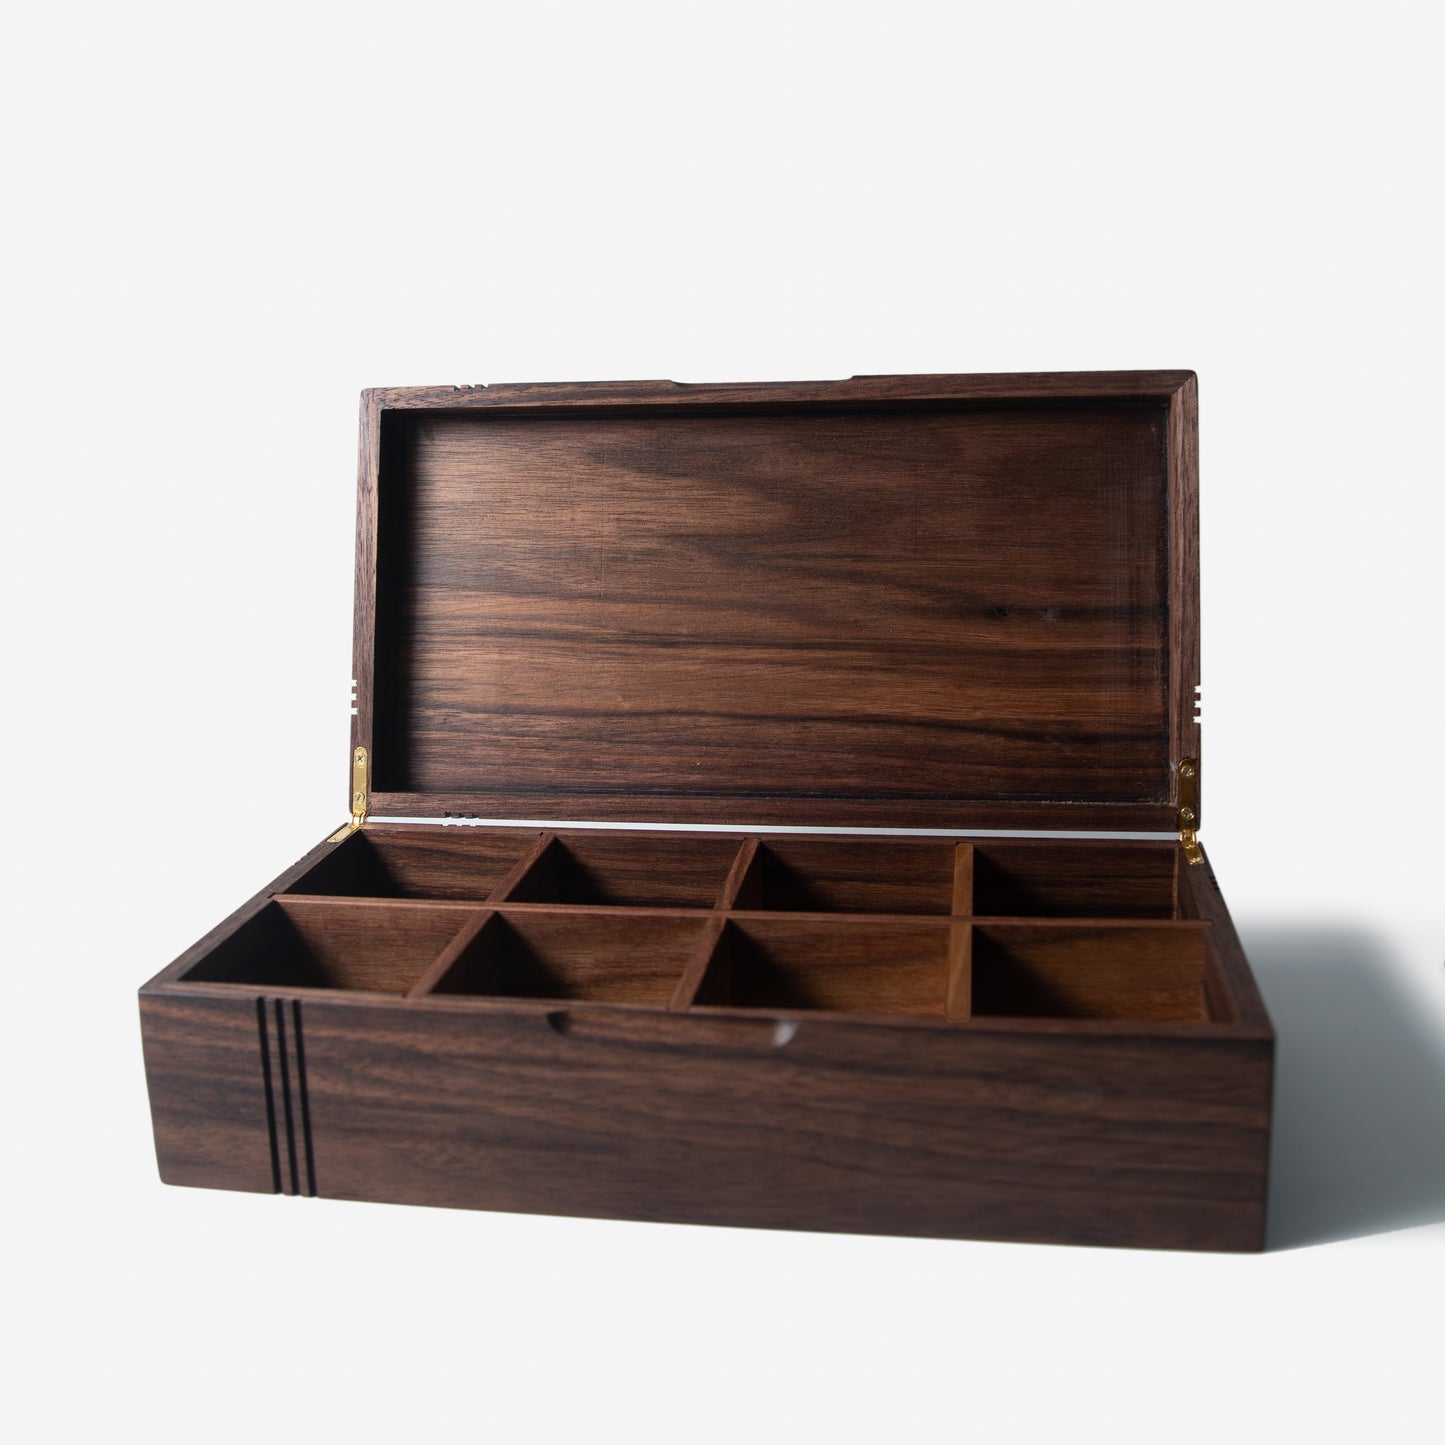 Black Walnut - Handcrafted with 8 compartments and Hinged Lid with Brass Hinges